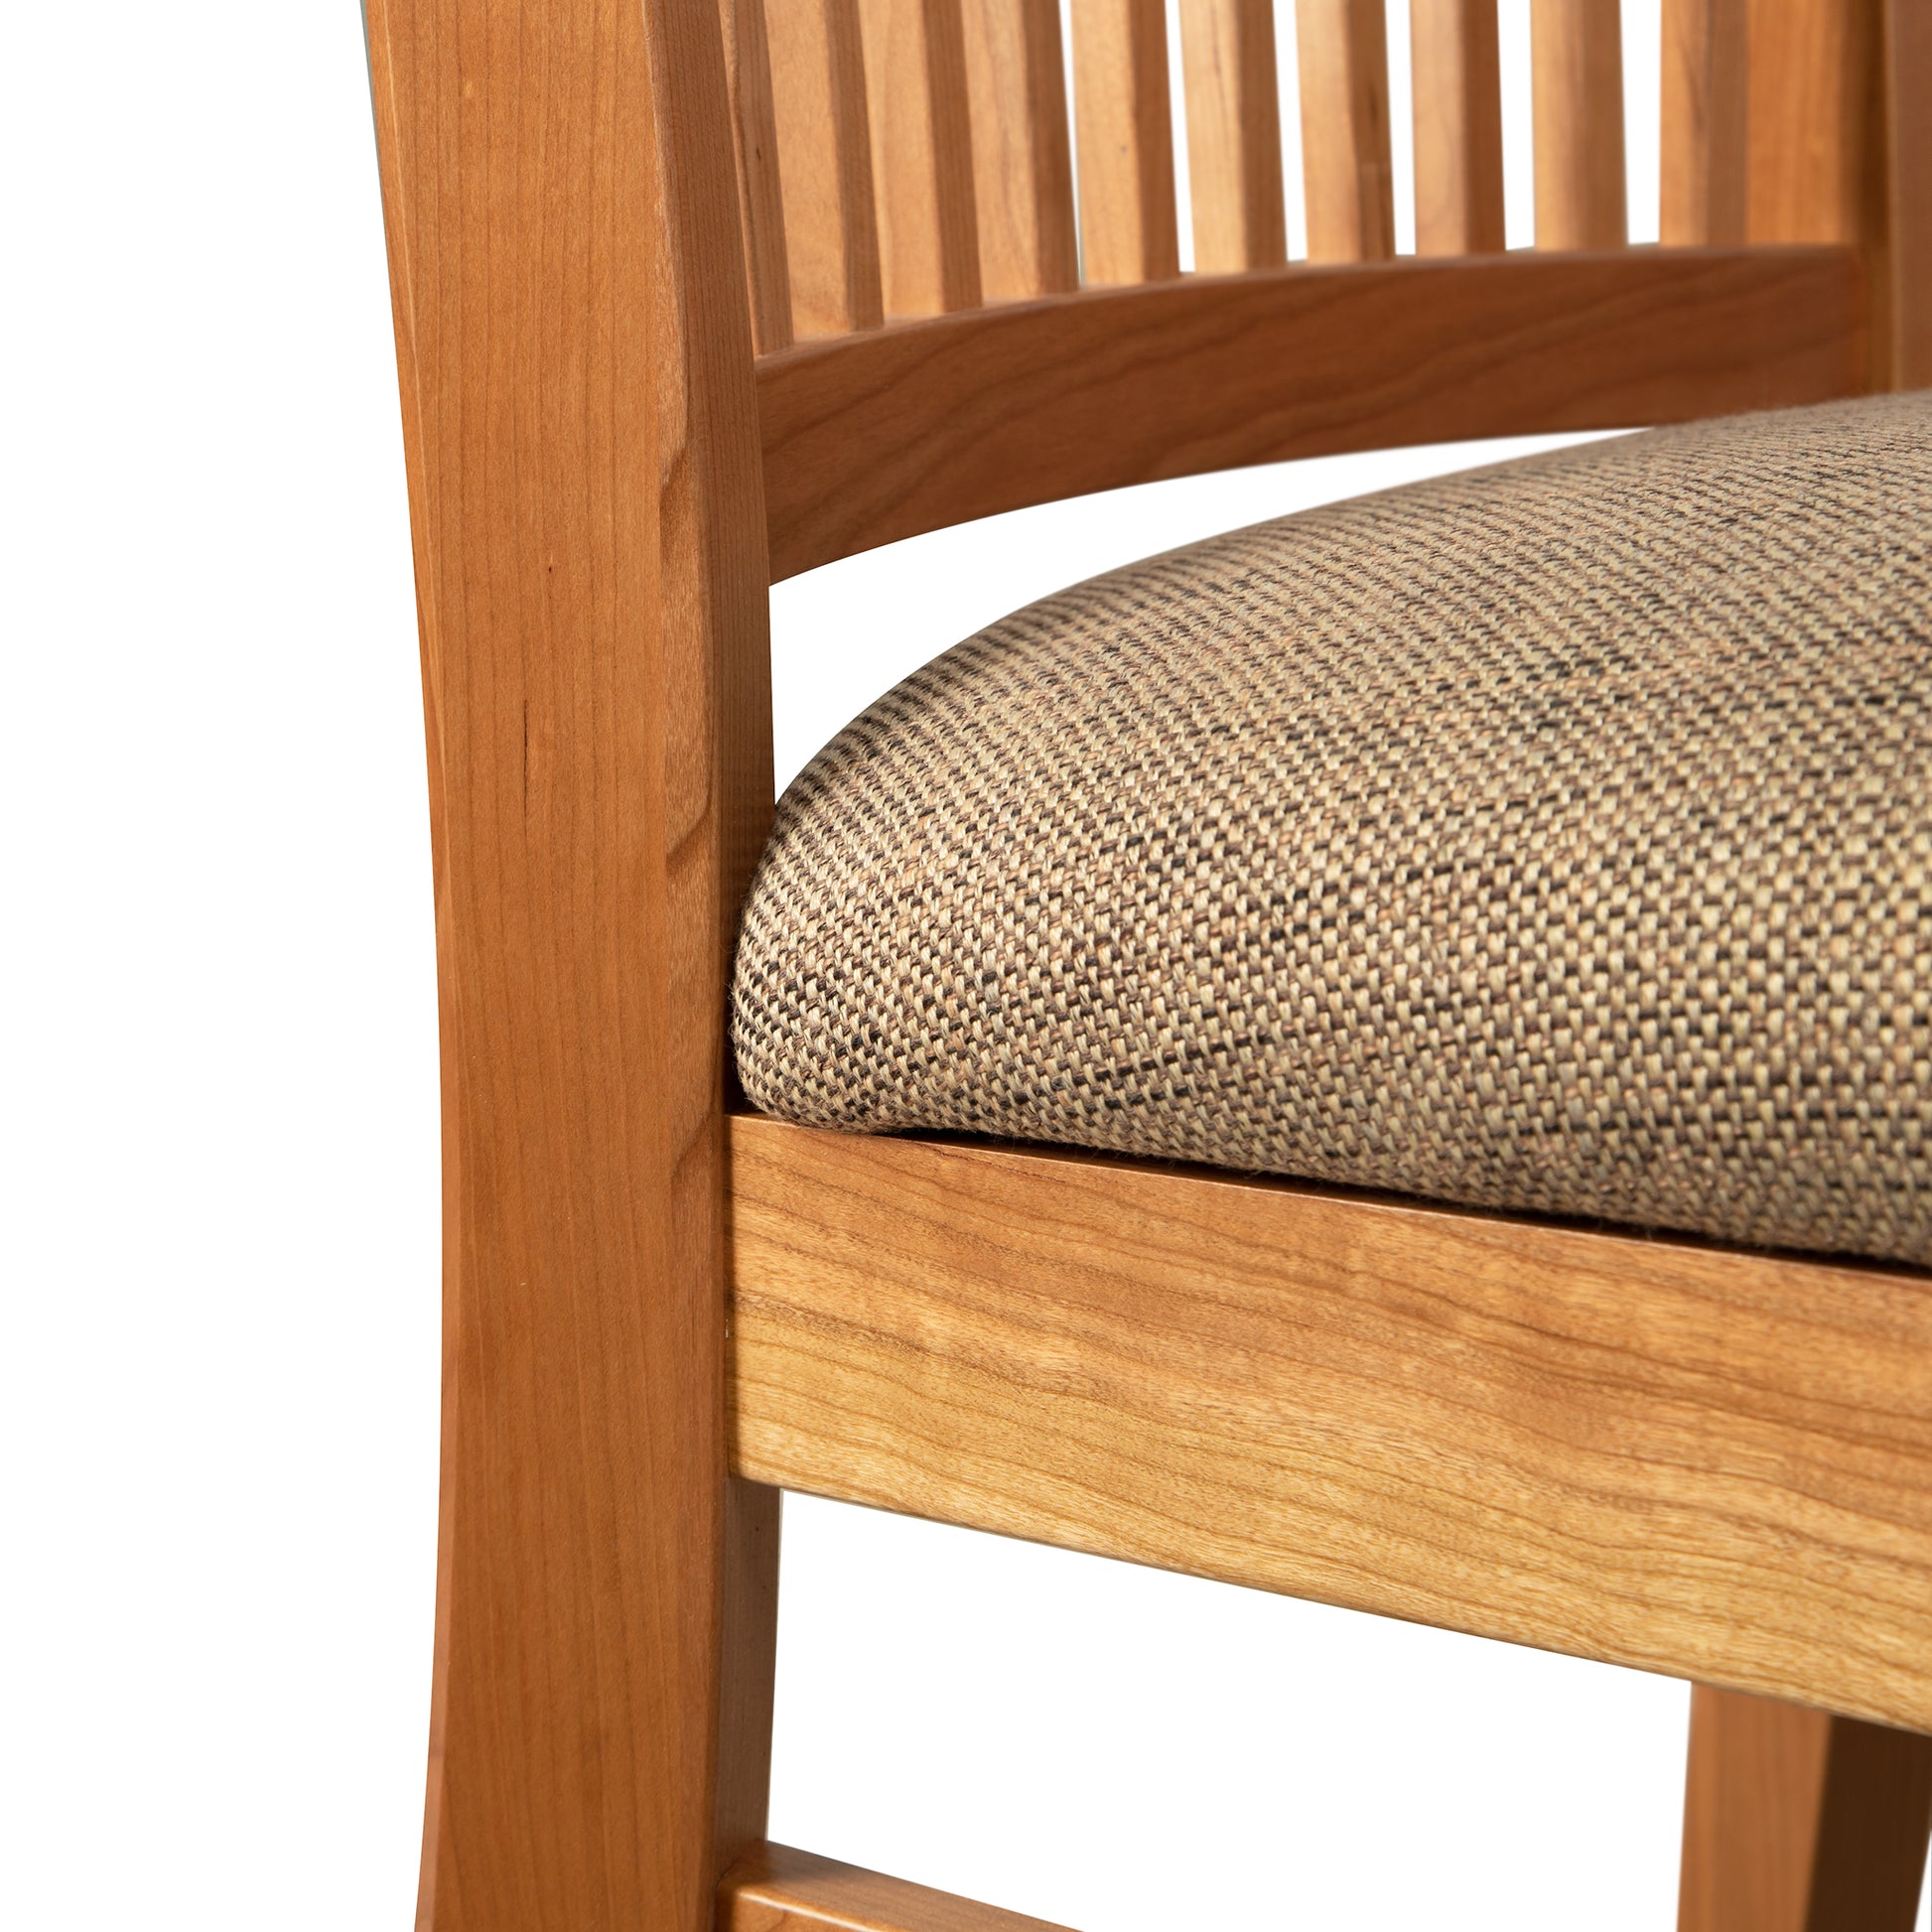 A close up of a wooden chair with a tan upholstered seat.